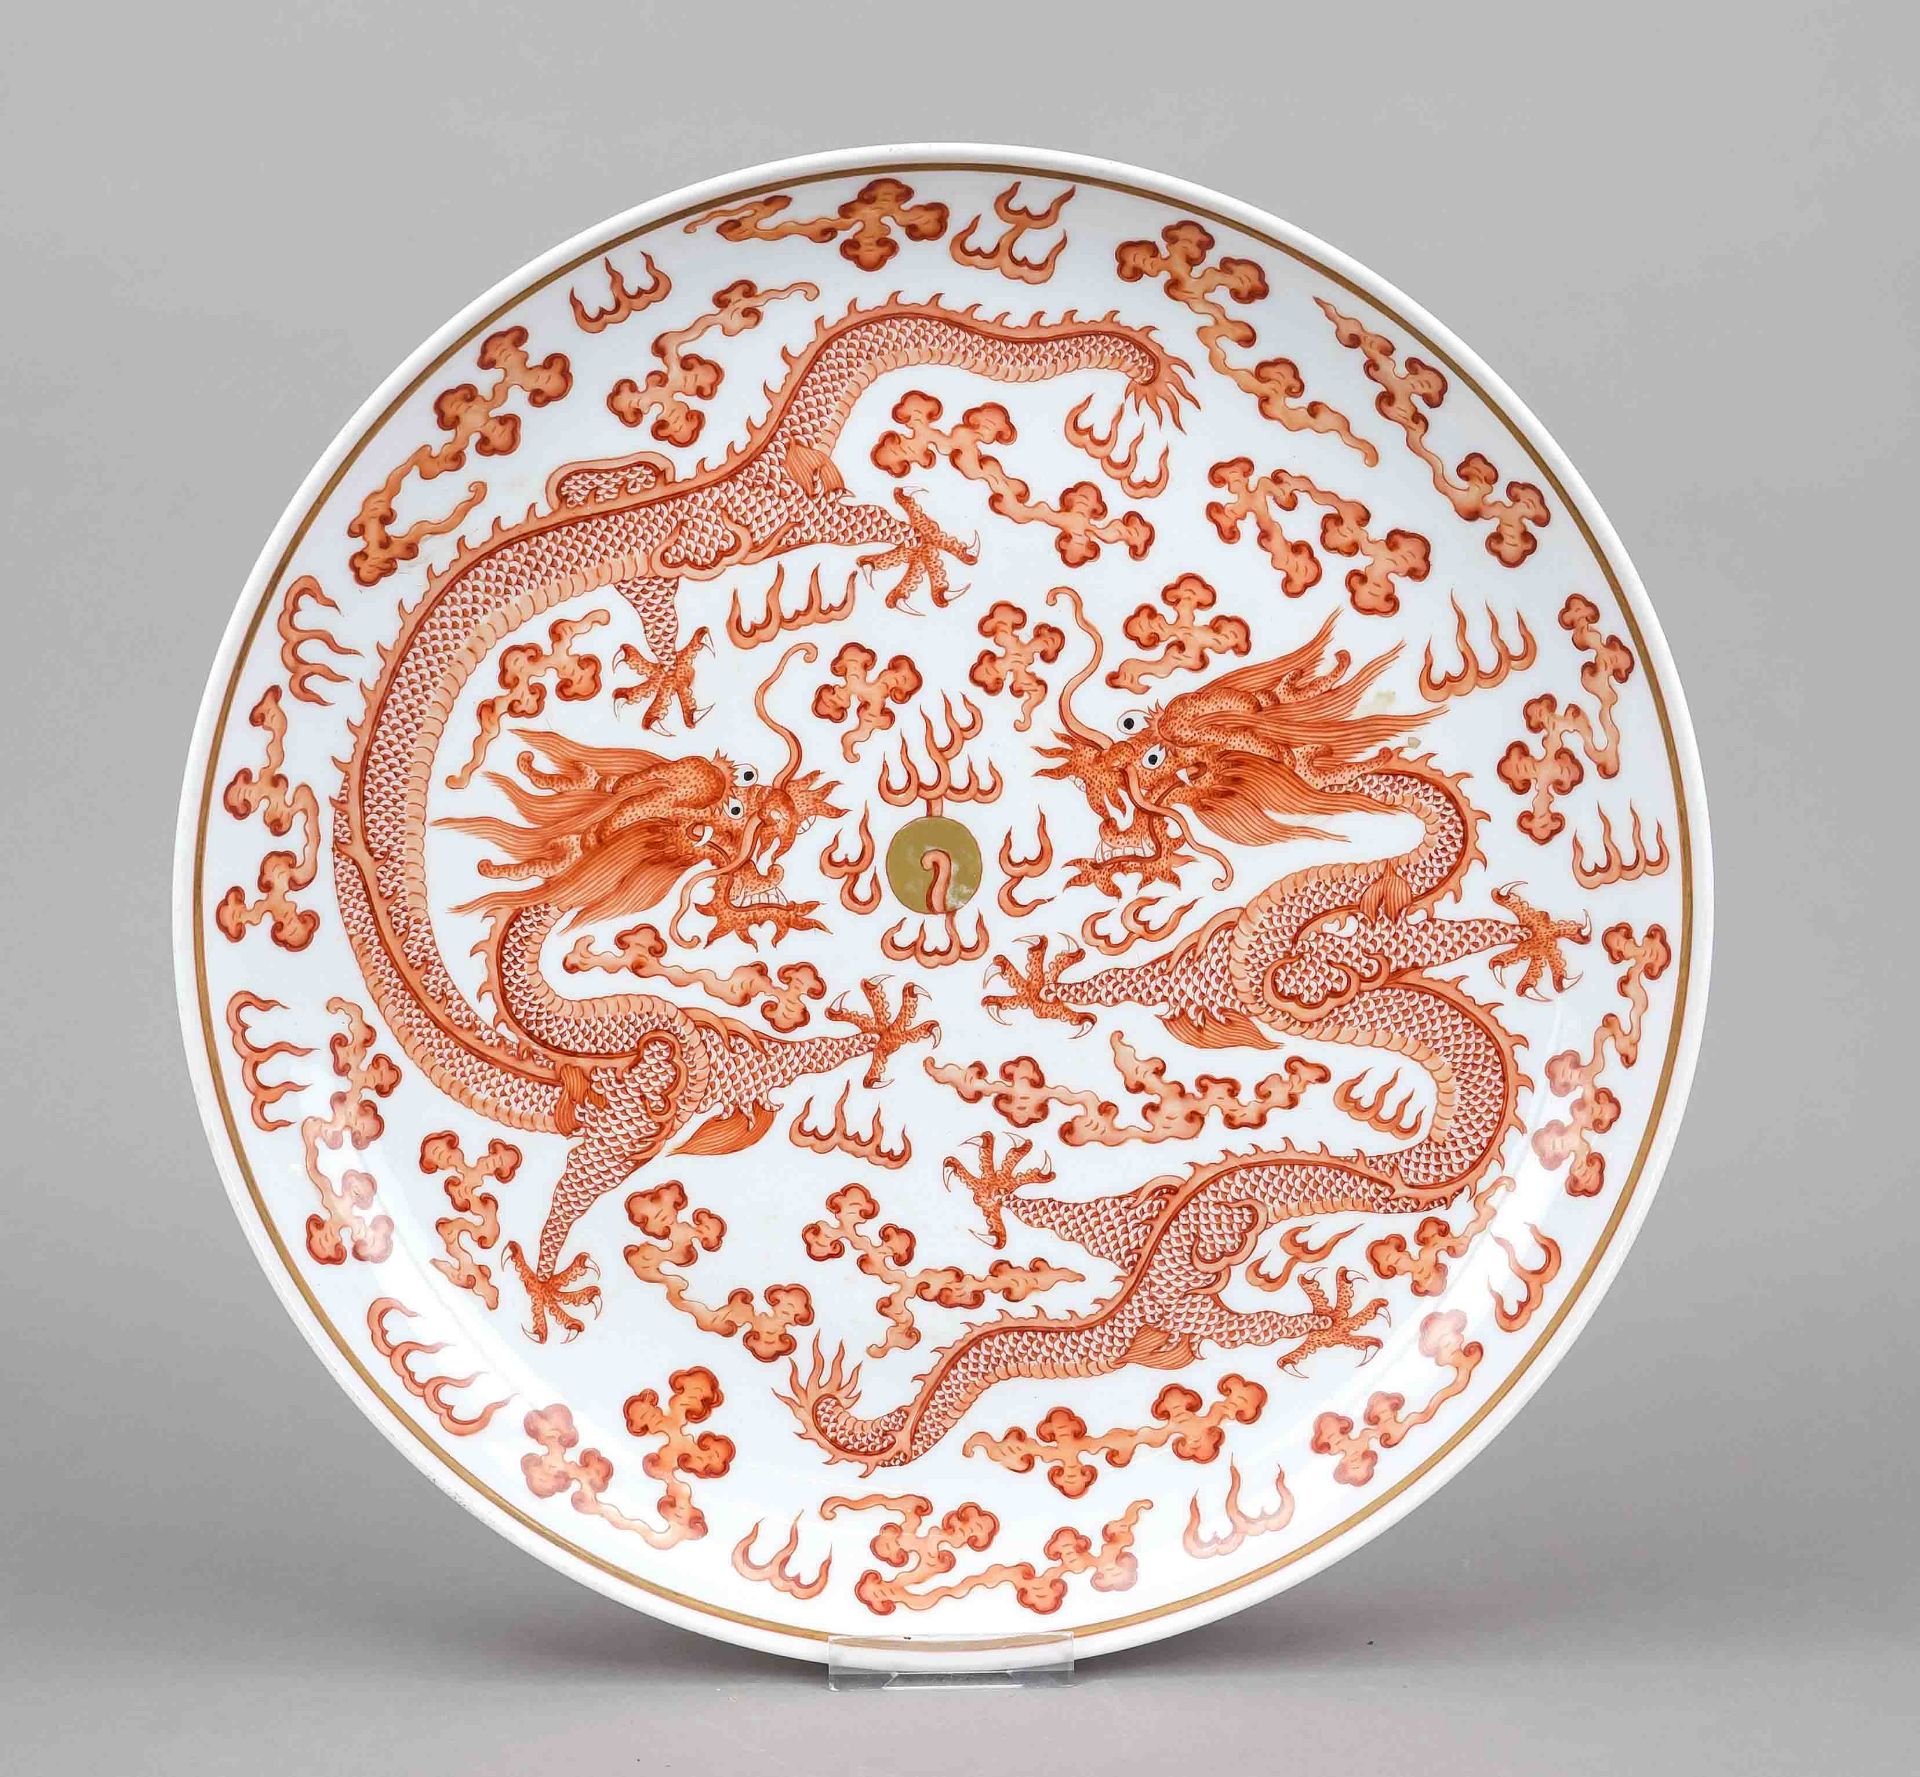 Large dragon plate, China probably late Qing (around 1900). Iron-red decoration over a mirror and